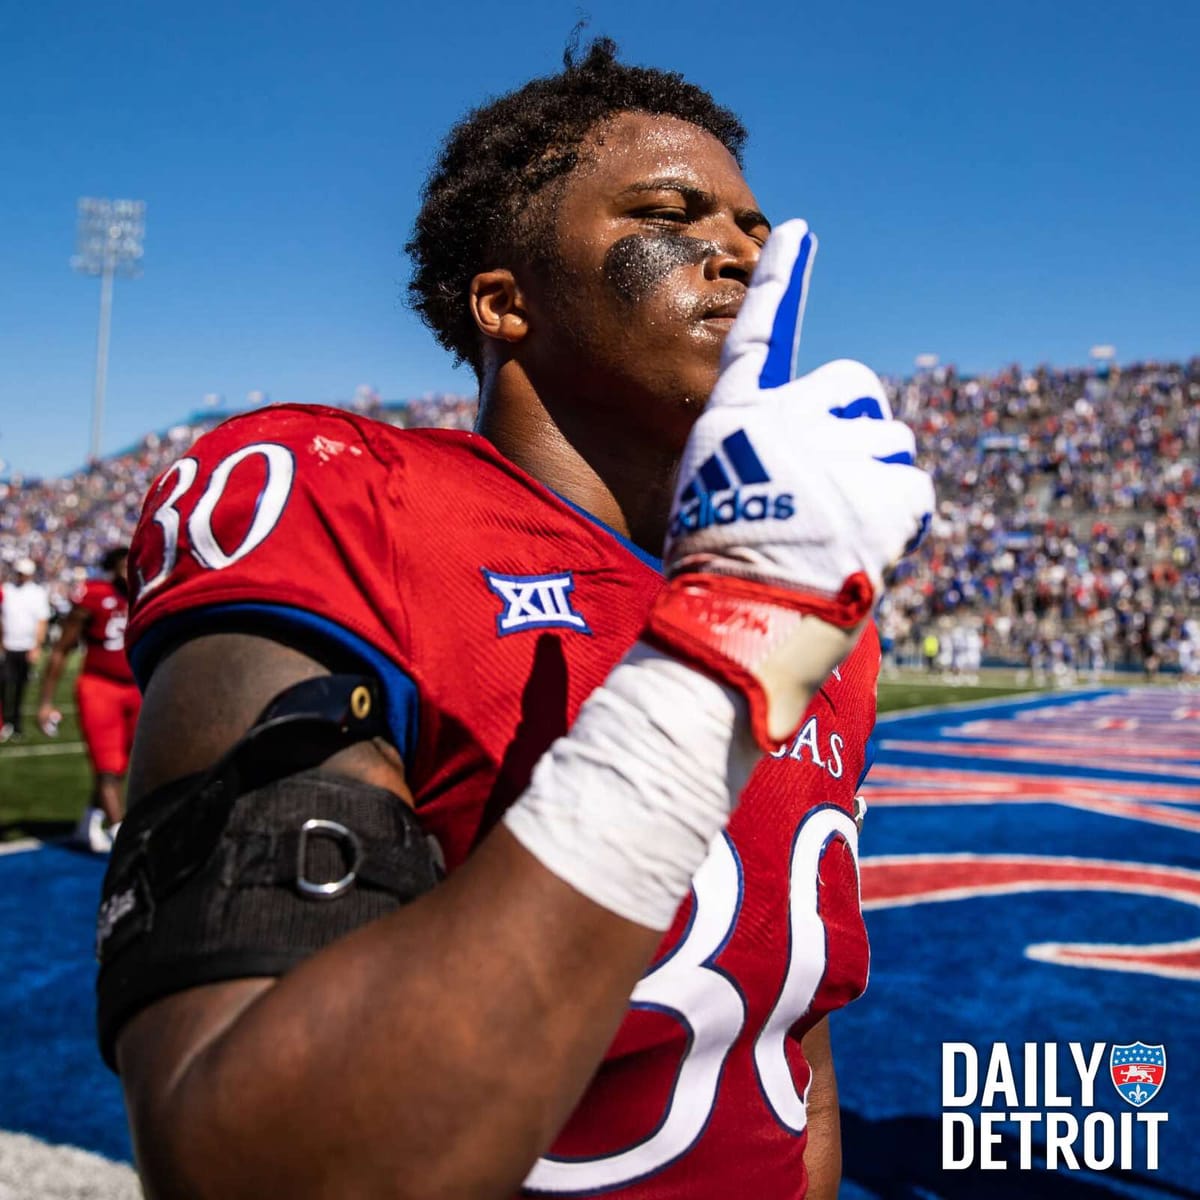 Talking to an NFL Draft prospect from Detroit // Troy Weaver stays // Detroit City wins